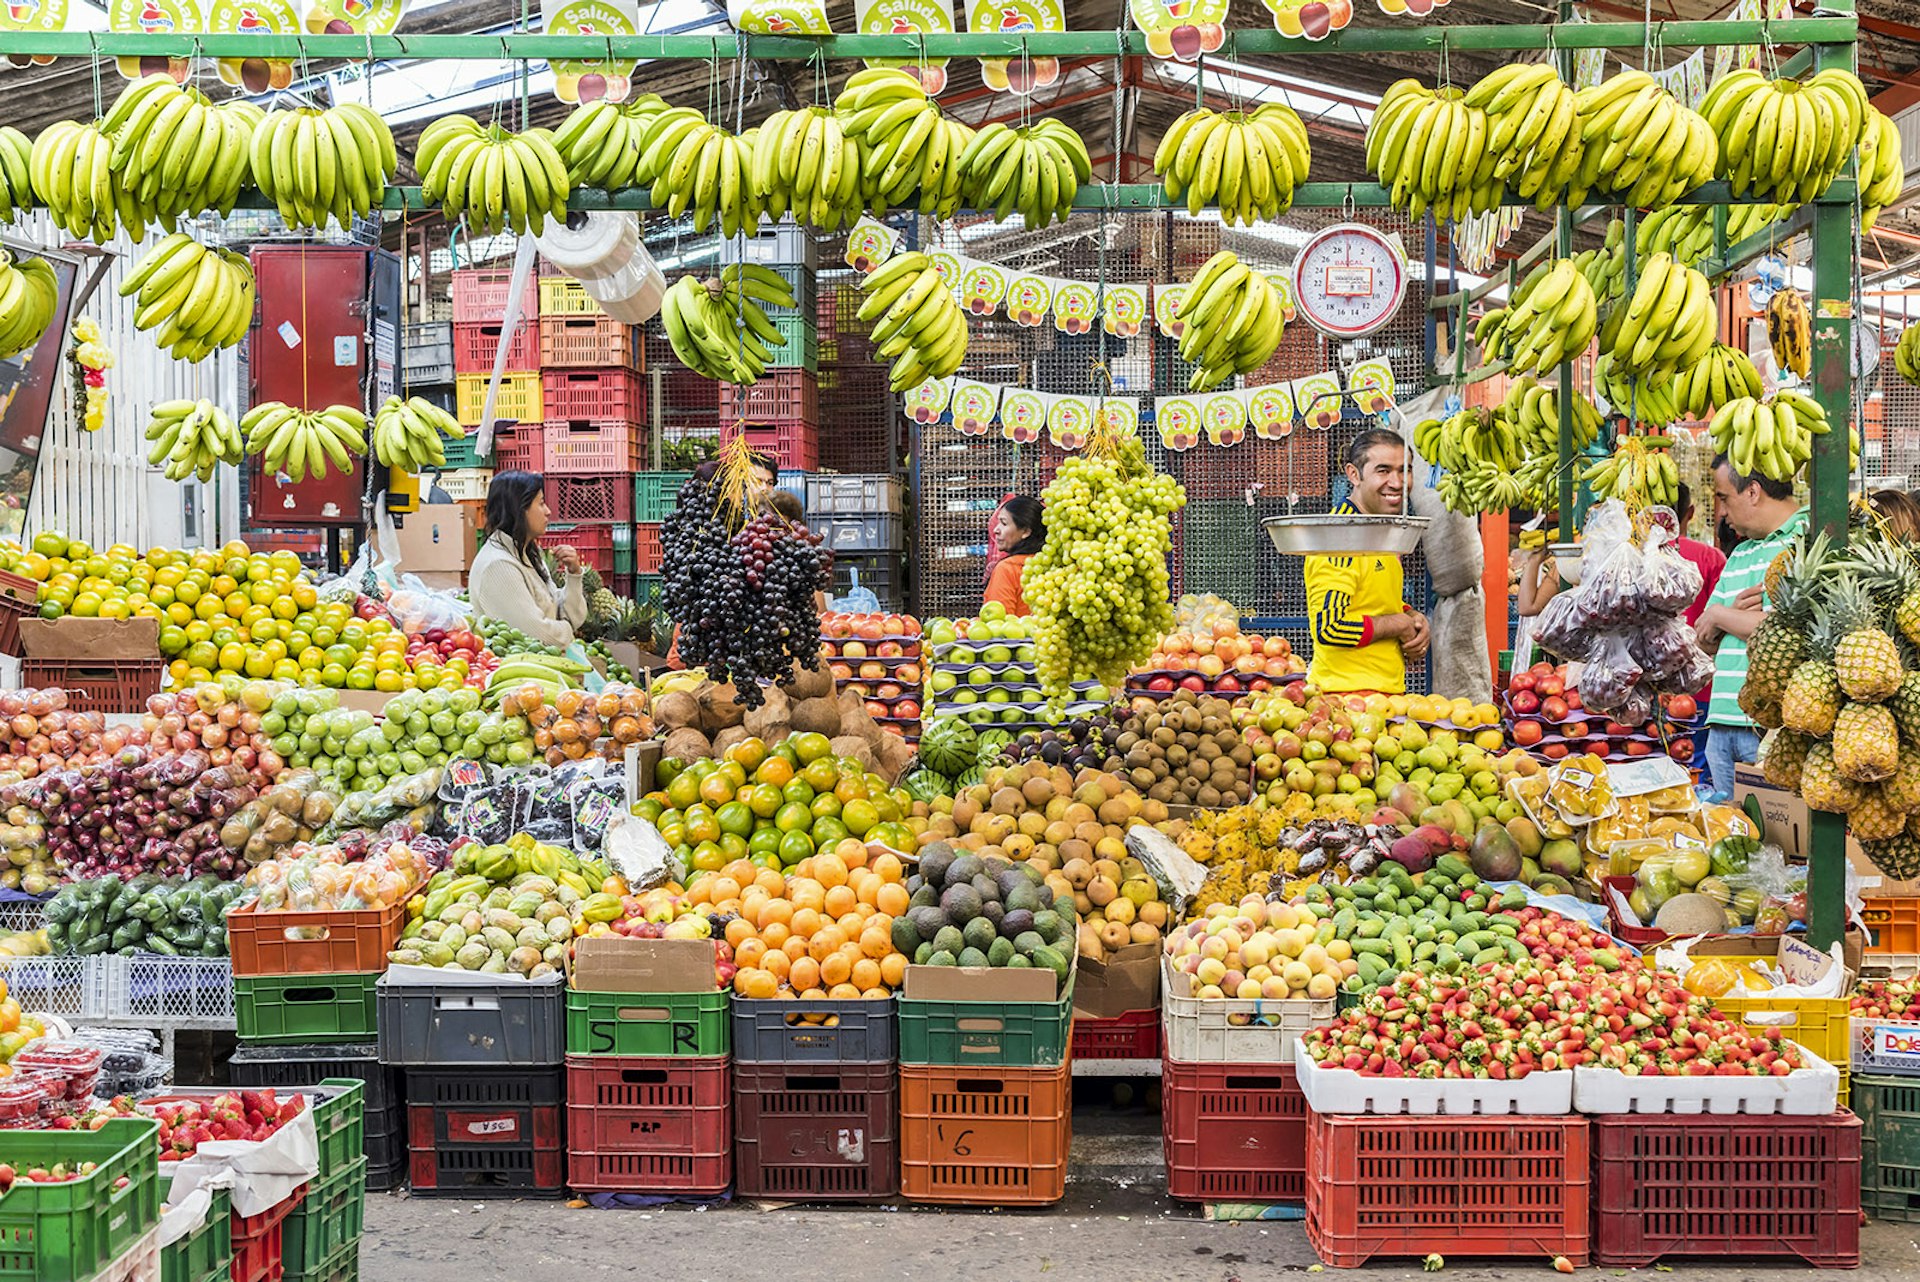 Features - Bananas and fruits at Paloquemao Market in Bogota Colombia